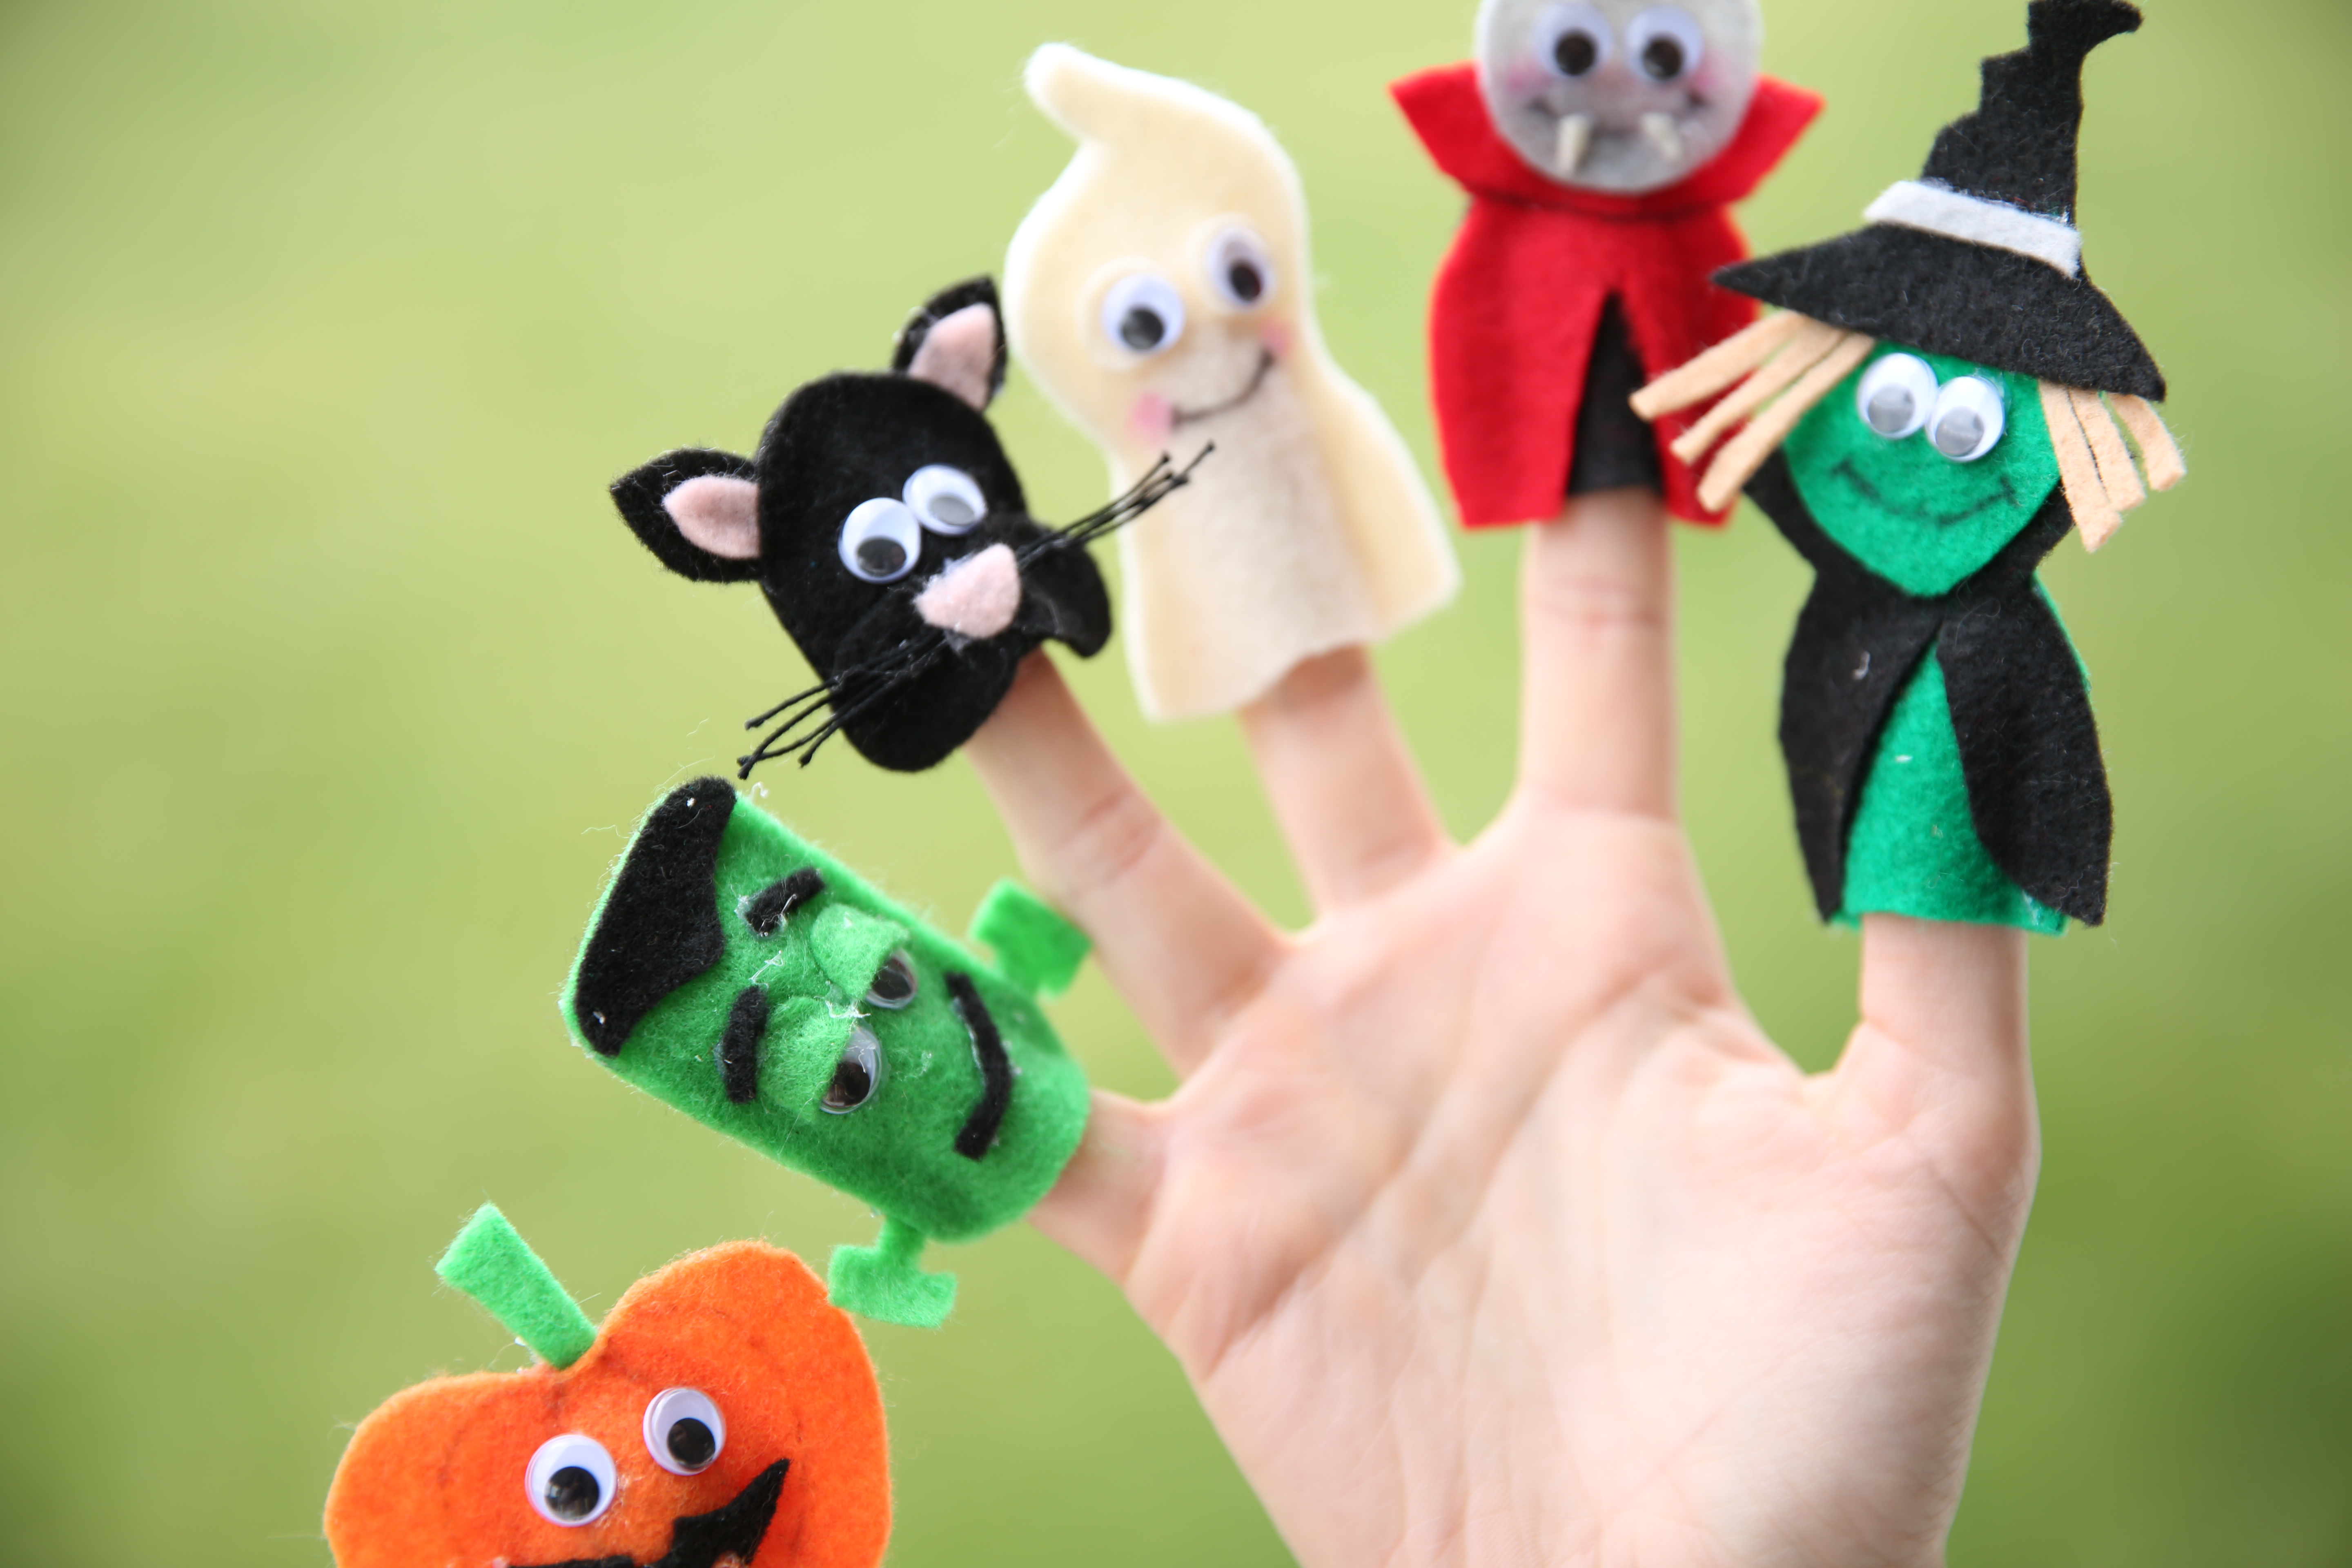 Assorted Color PartyKindom Halloween Themed Cartoon Finger Puppets Finger Puppets Halloween for Halloween Party